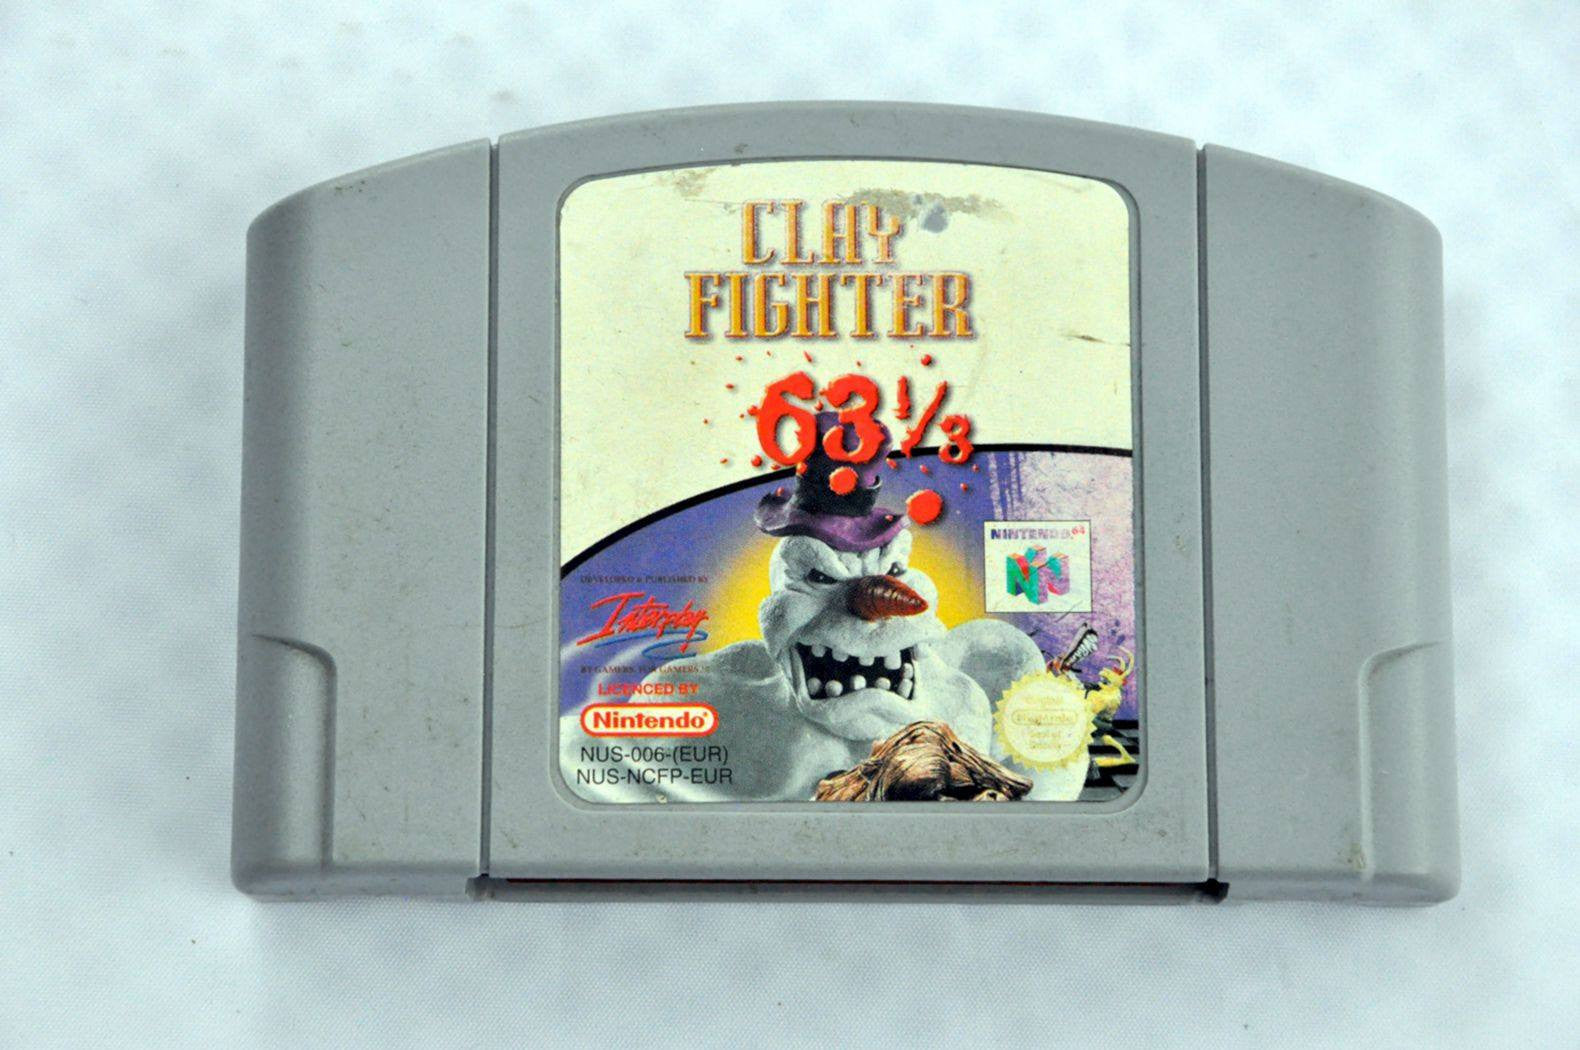 Game - Game | Nintendo 64 N64 | Clay Fighter 63 1/3